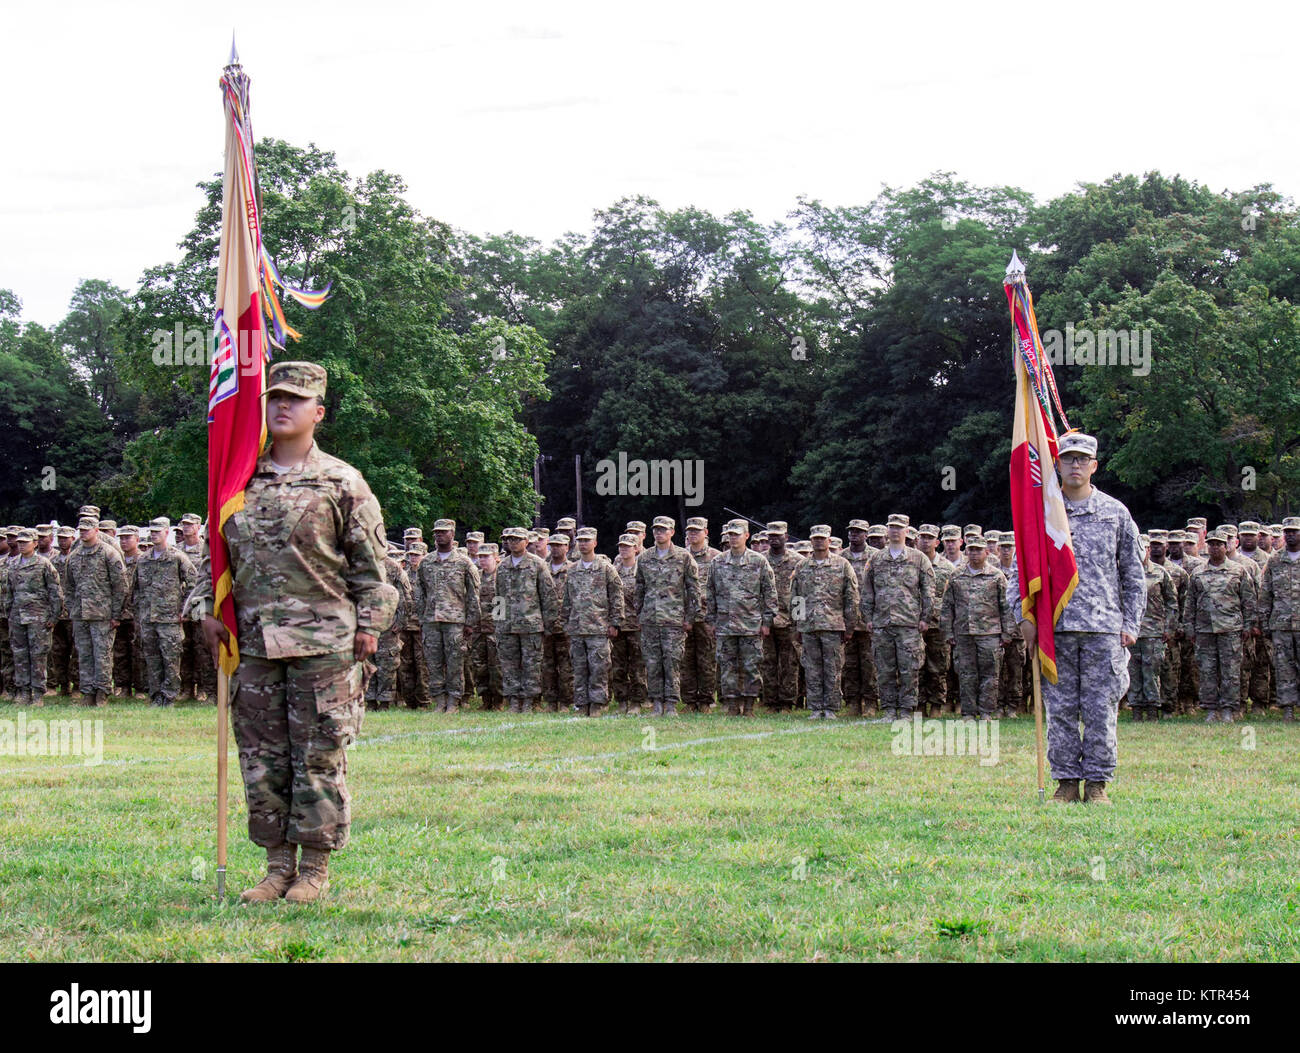 More than 250 New York Army National Guard Soldiers assigned to the 369th Sustainment Brigade participate in a deployment ceremony at Camp Smith Training Site as the brigade prepares to leave New York and deploy to Kuwait, September 7, 2016. (U.S. Army National Guard photo by Sgt. Michael Davis) Stock Photo